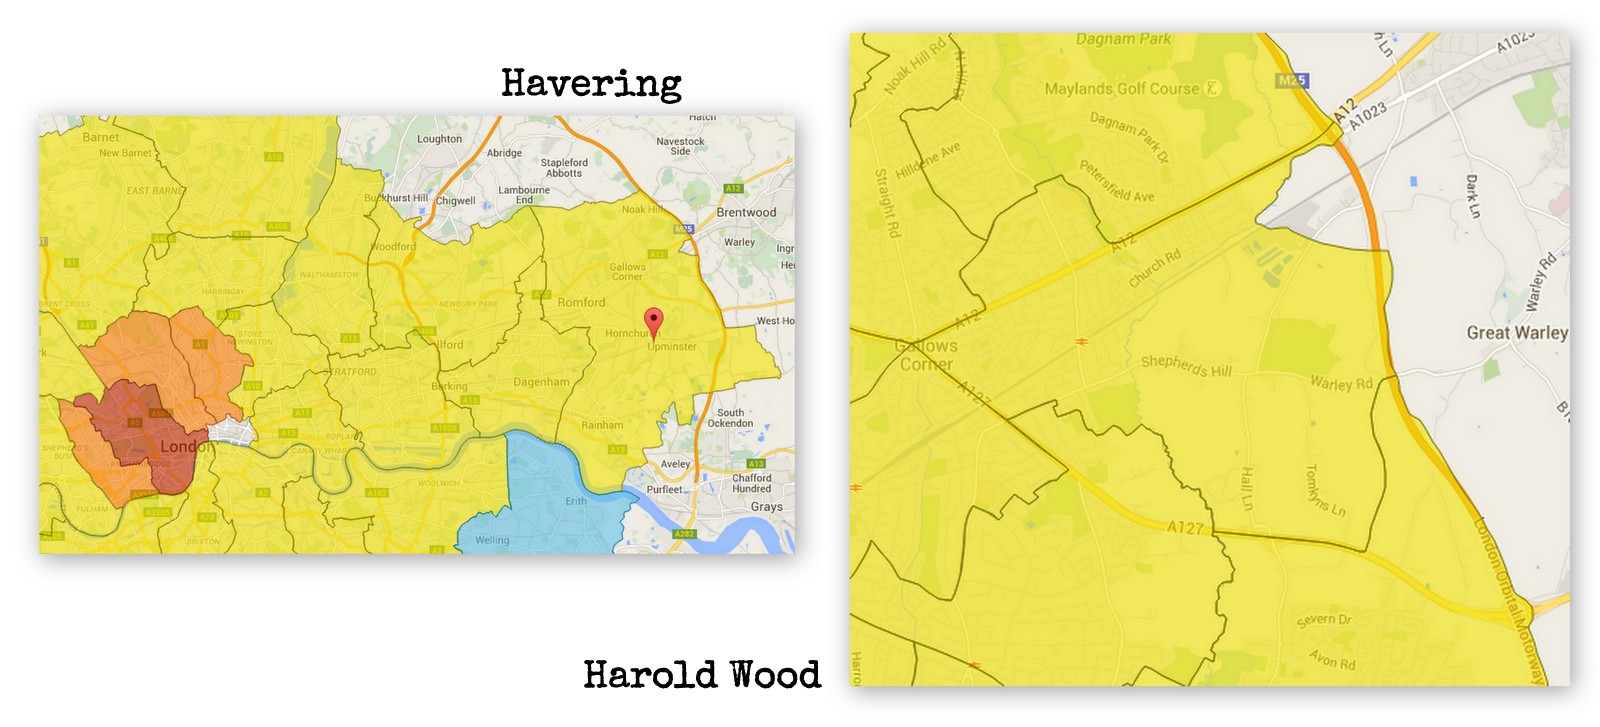 About Havering and Harold Wood